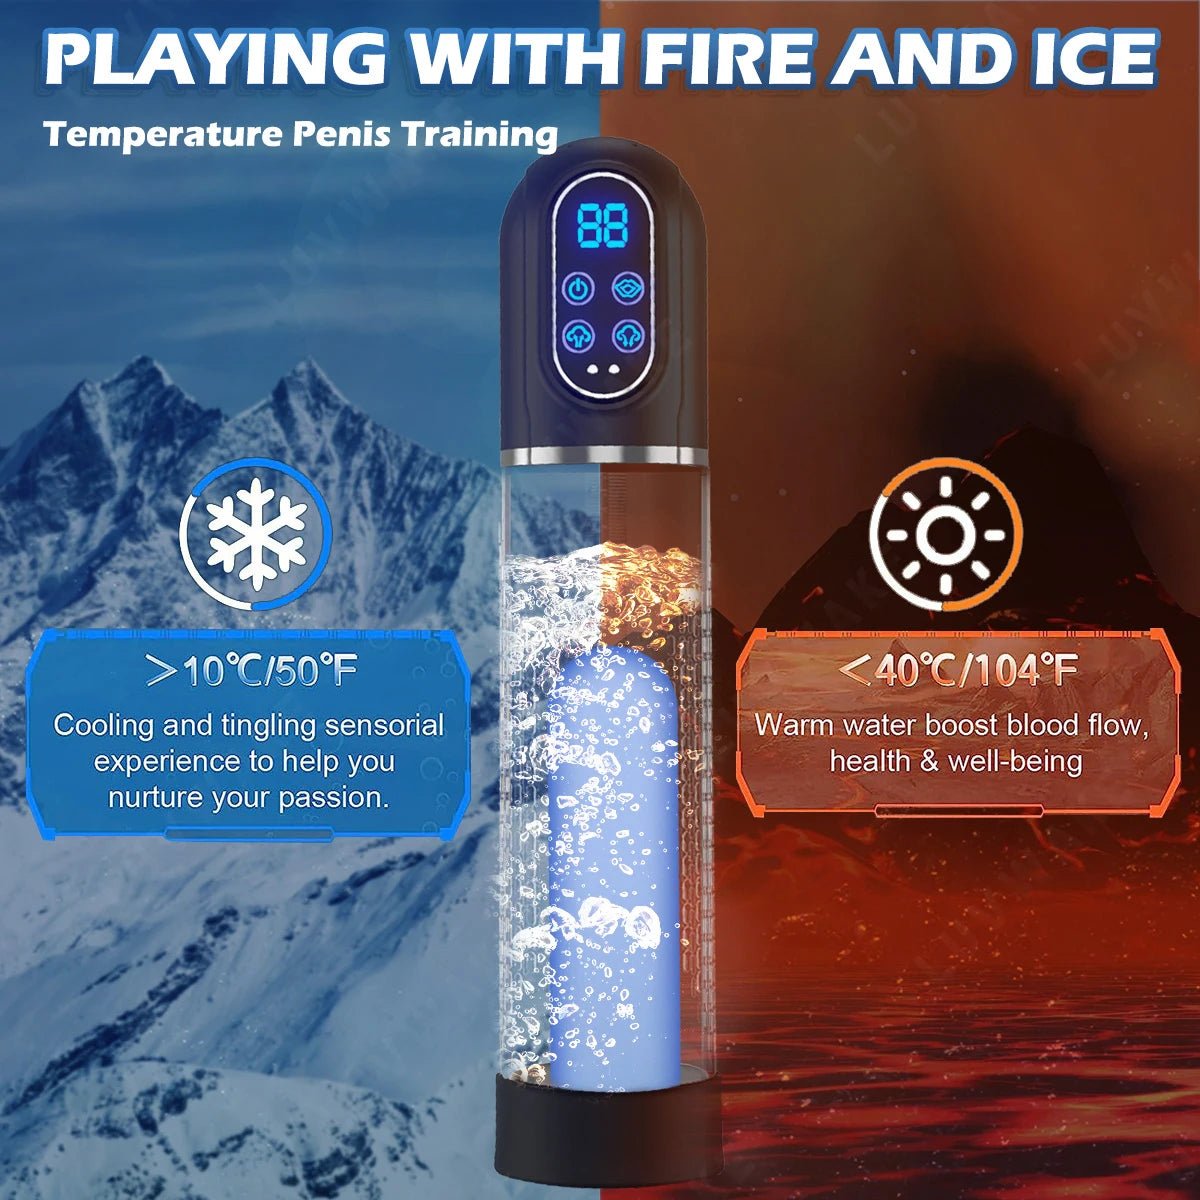 Water-Based Automatic Sucking Pump, male enhancement, fire and ice